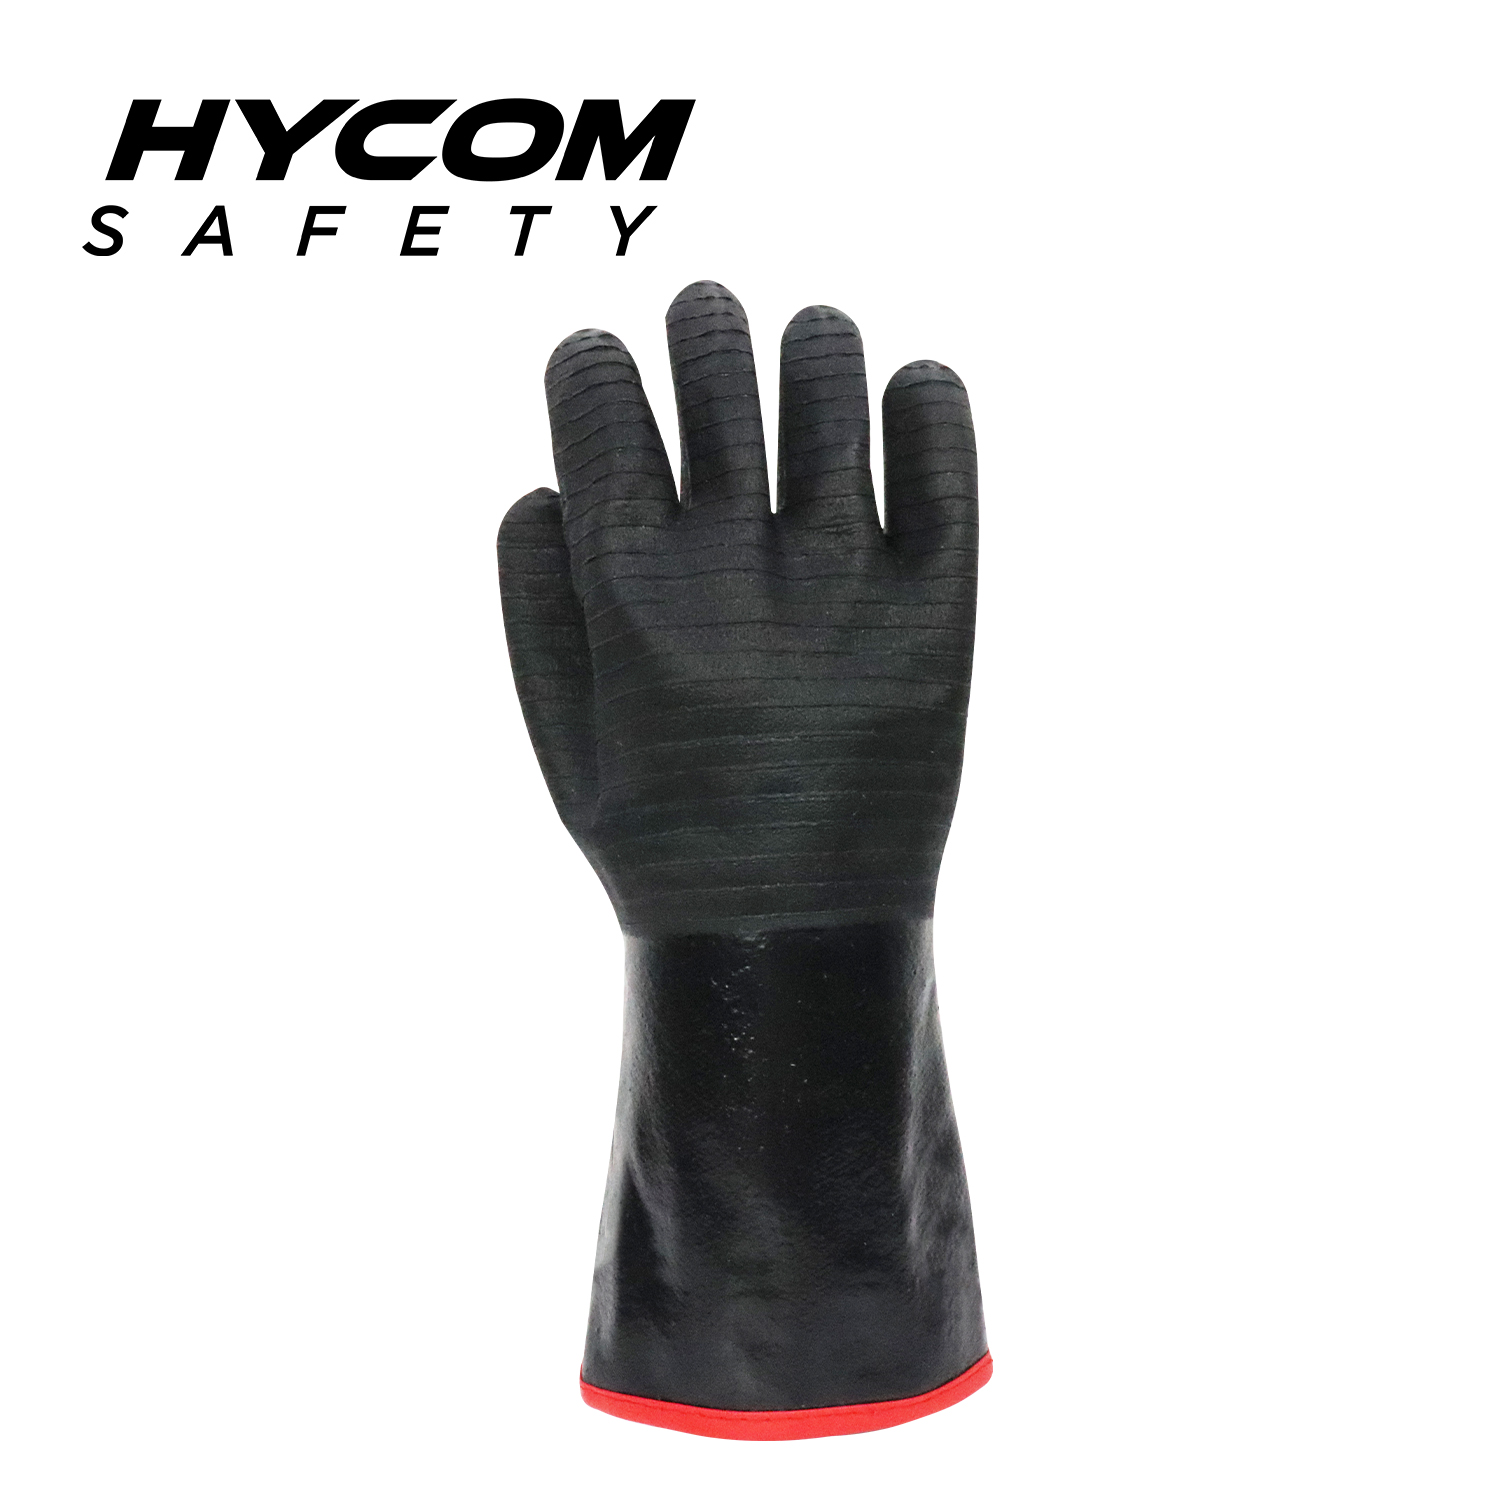 HYCOM Water Proof Oil Resistant Barbecue Glove with 450°C/840°F Contact Temperature Food Grade Super Grip Safety Gloves